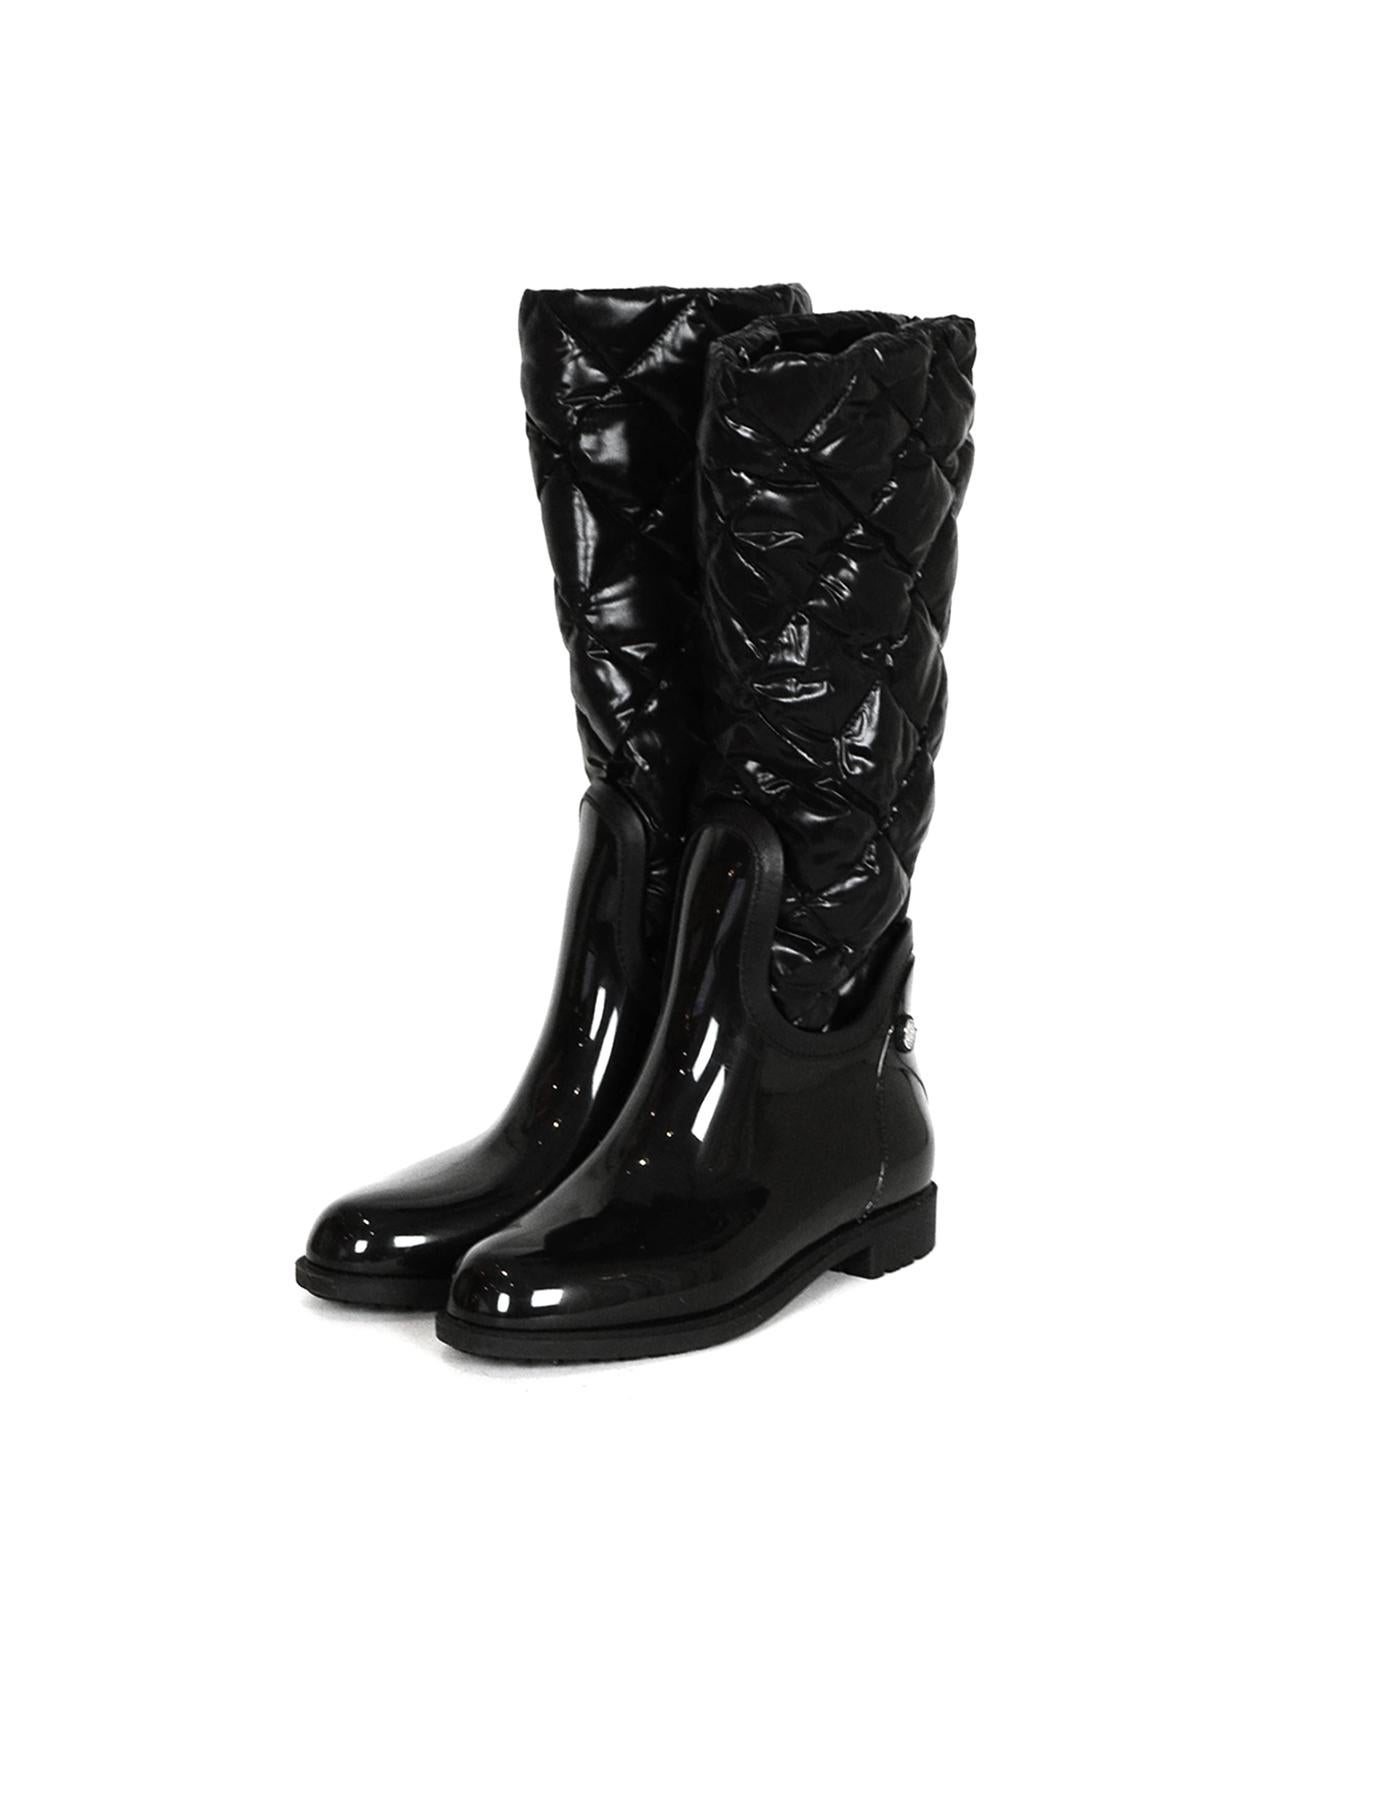 Moncler Black Rubber Rain Boots with Detachable Quilted Down sz 36

Made In: Italy
Color: Black
Hardware: Silvertone
Materials: Rubber
Closure/Opening: Slip-on
Overall Condition: Excellent pre-owned condition, minor wear on the bottom of heels and